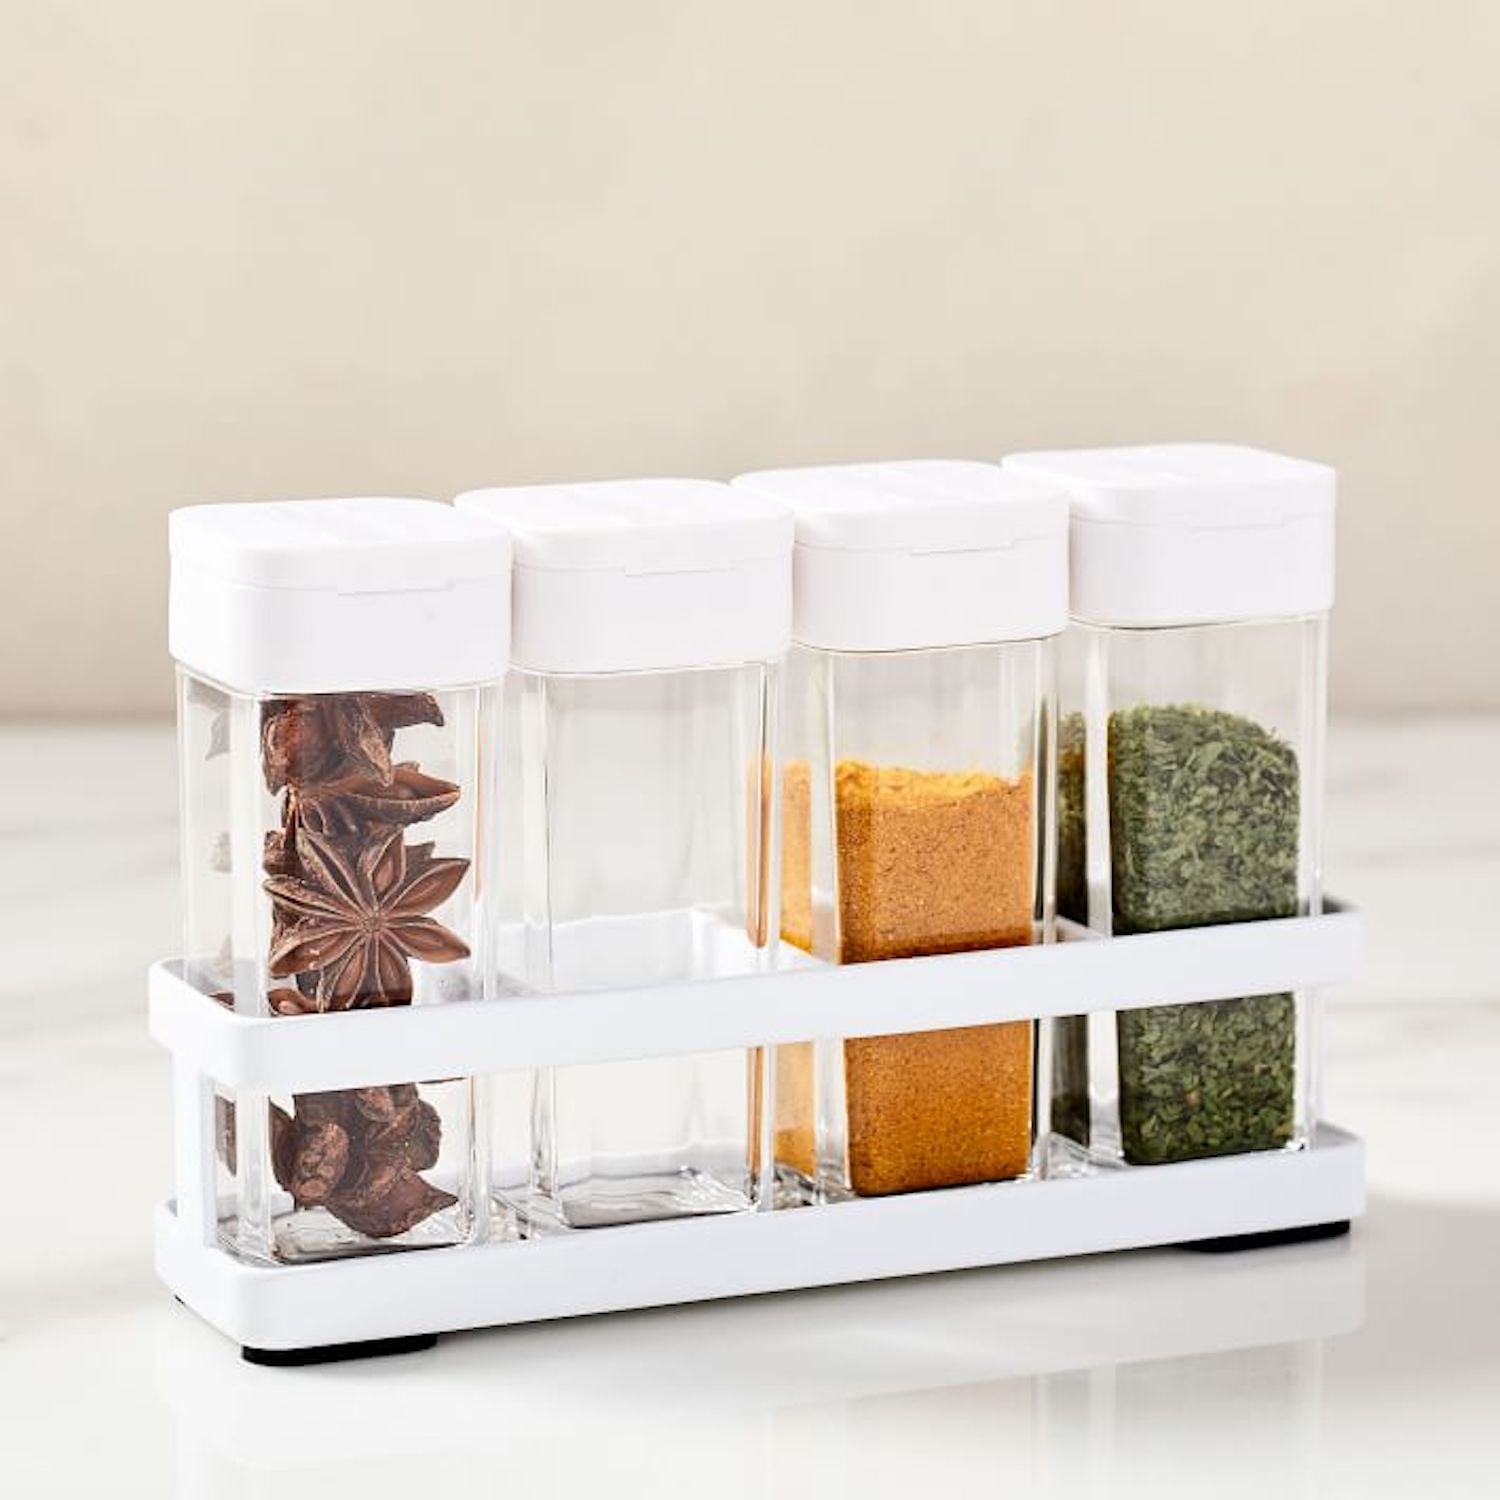 Best Ways to Organize Your Spices 2021